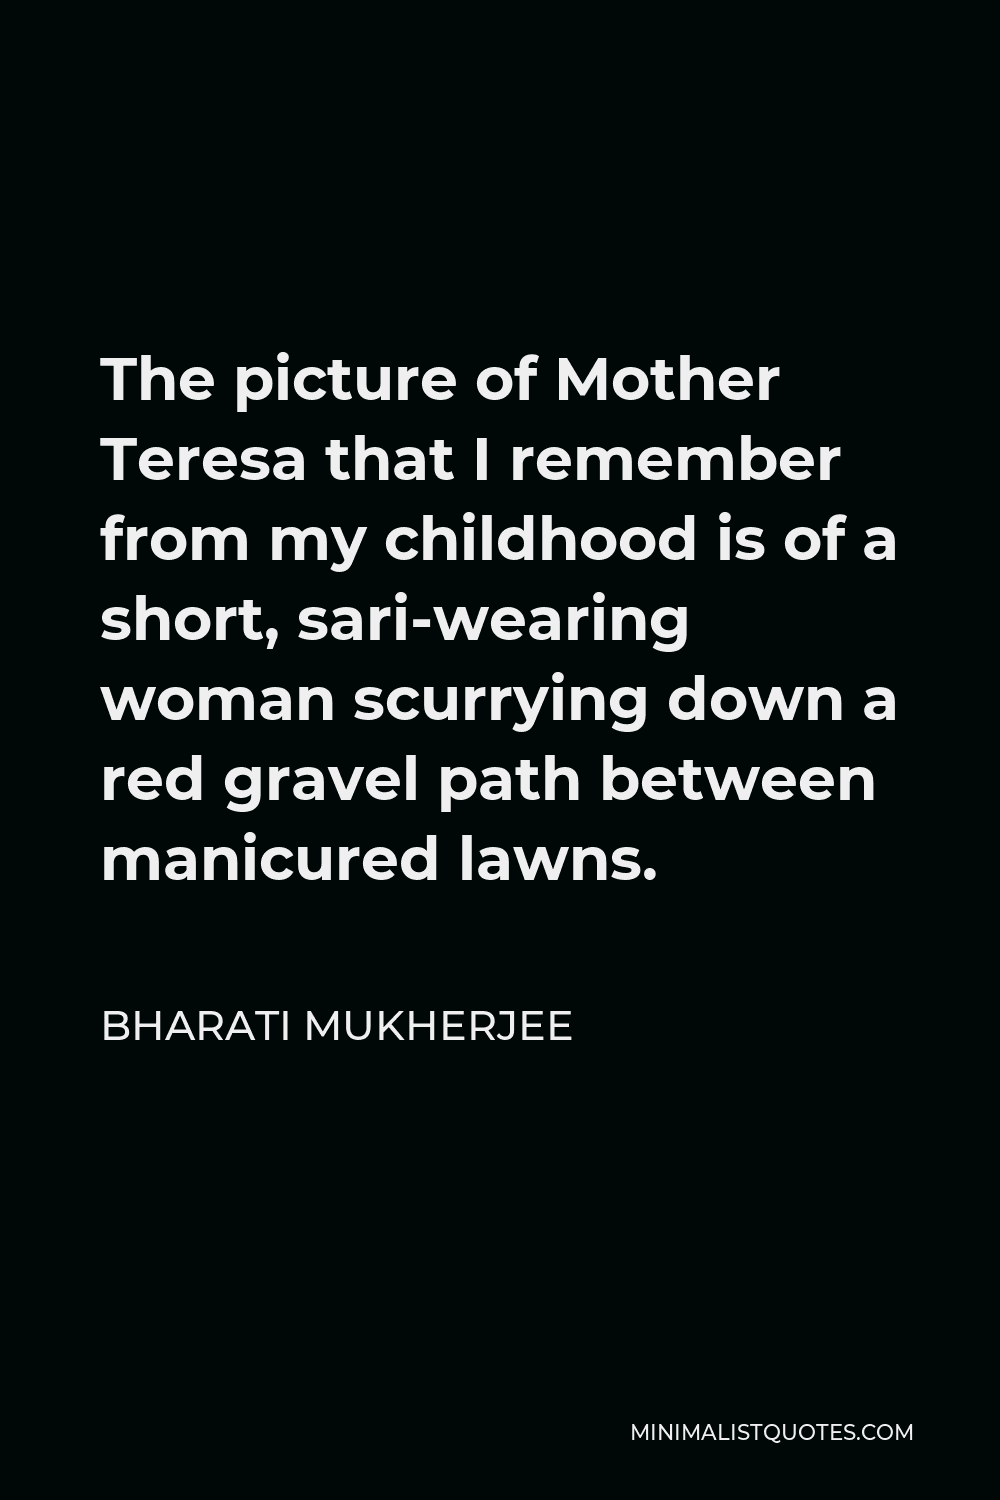 Bharati Mukherjee Quote - The picture of Mother Teresa that I remember from my childhood is of a short, sari-wearing woman scurrying down a red gravel path between manicured lawns.